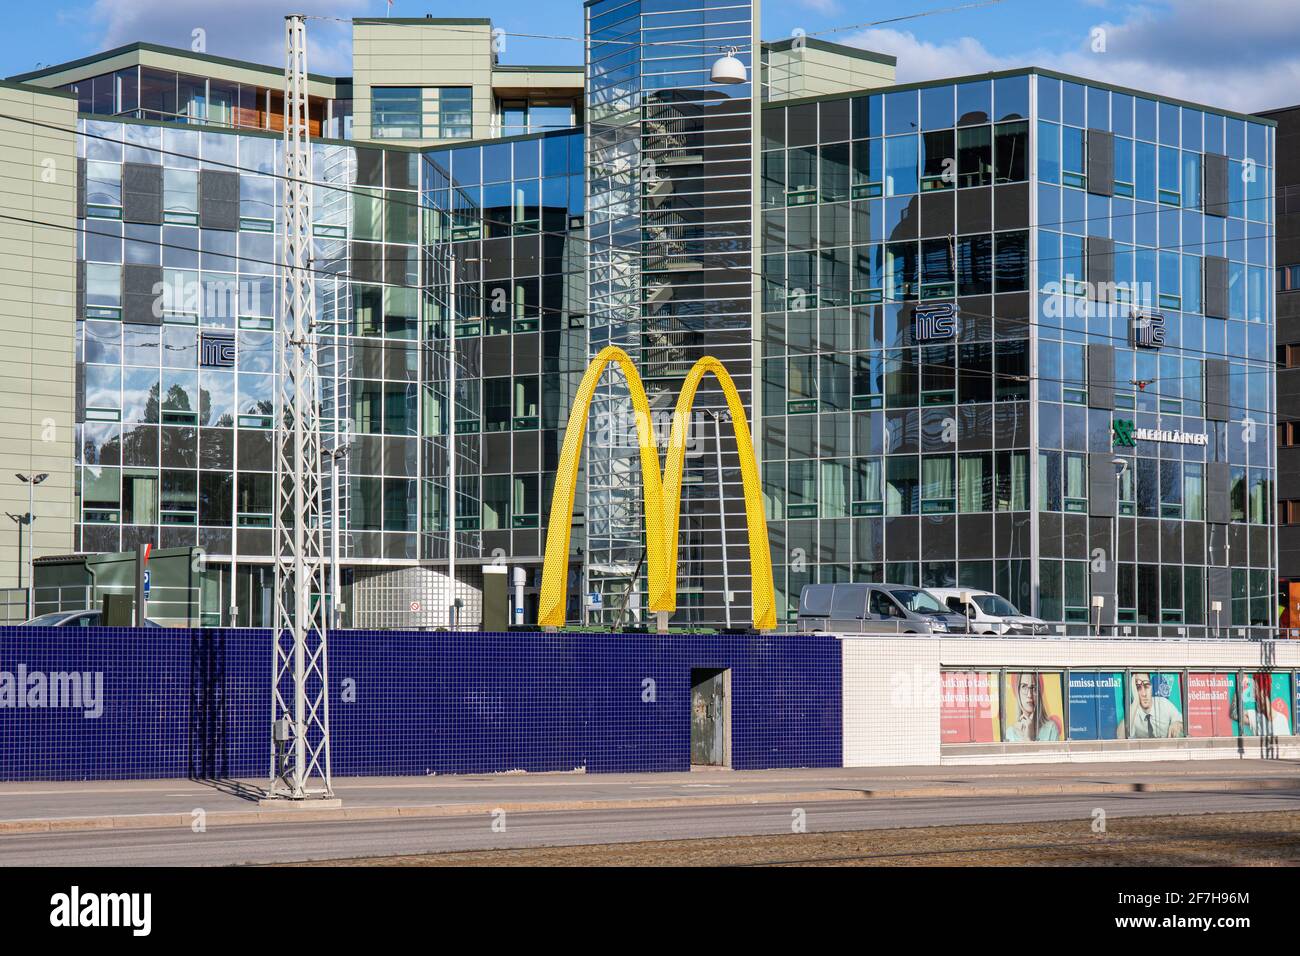 Golden arches or McDonald's logo in front of Paciuksenkatu 27-29 commercial buildings in Meilahti district of Helsinki, Finland Stock Photo